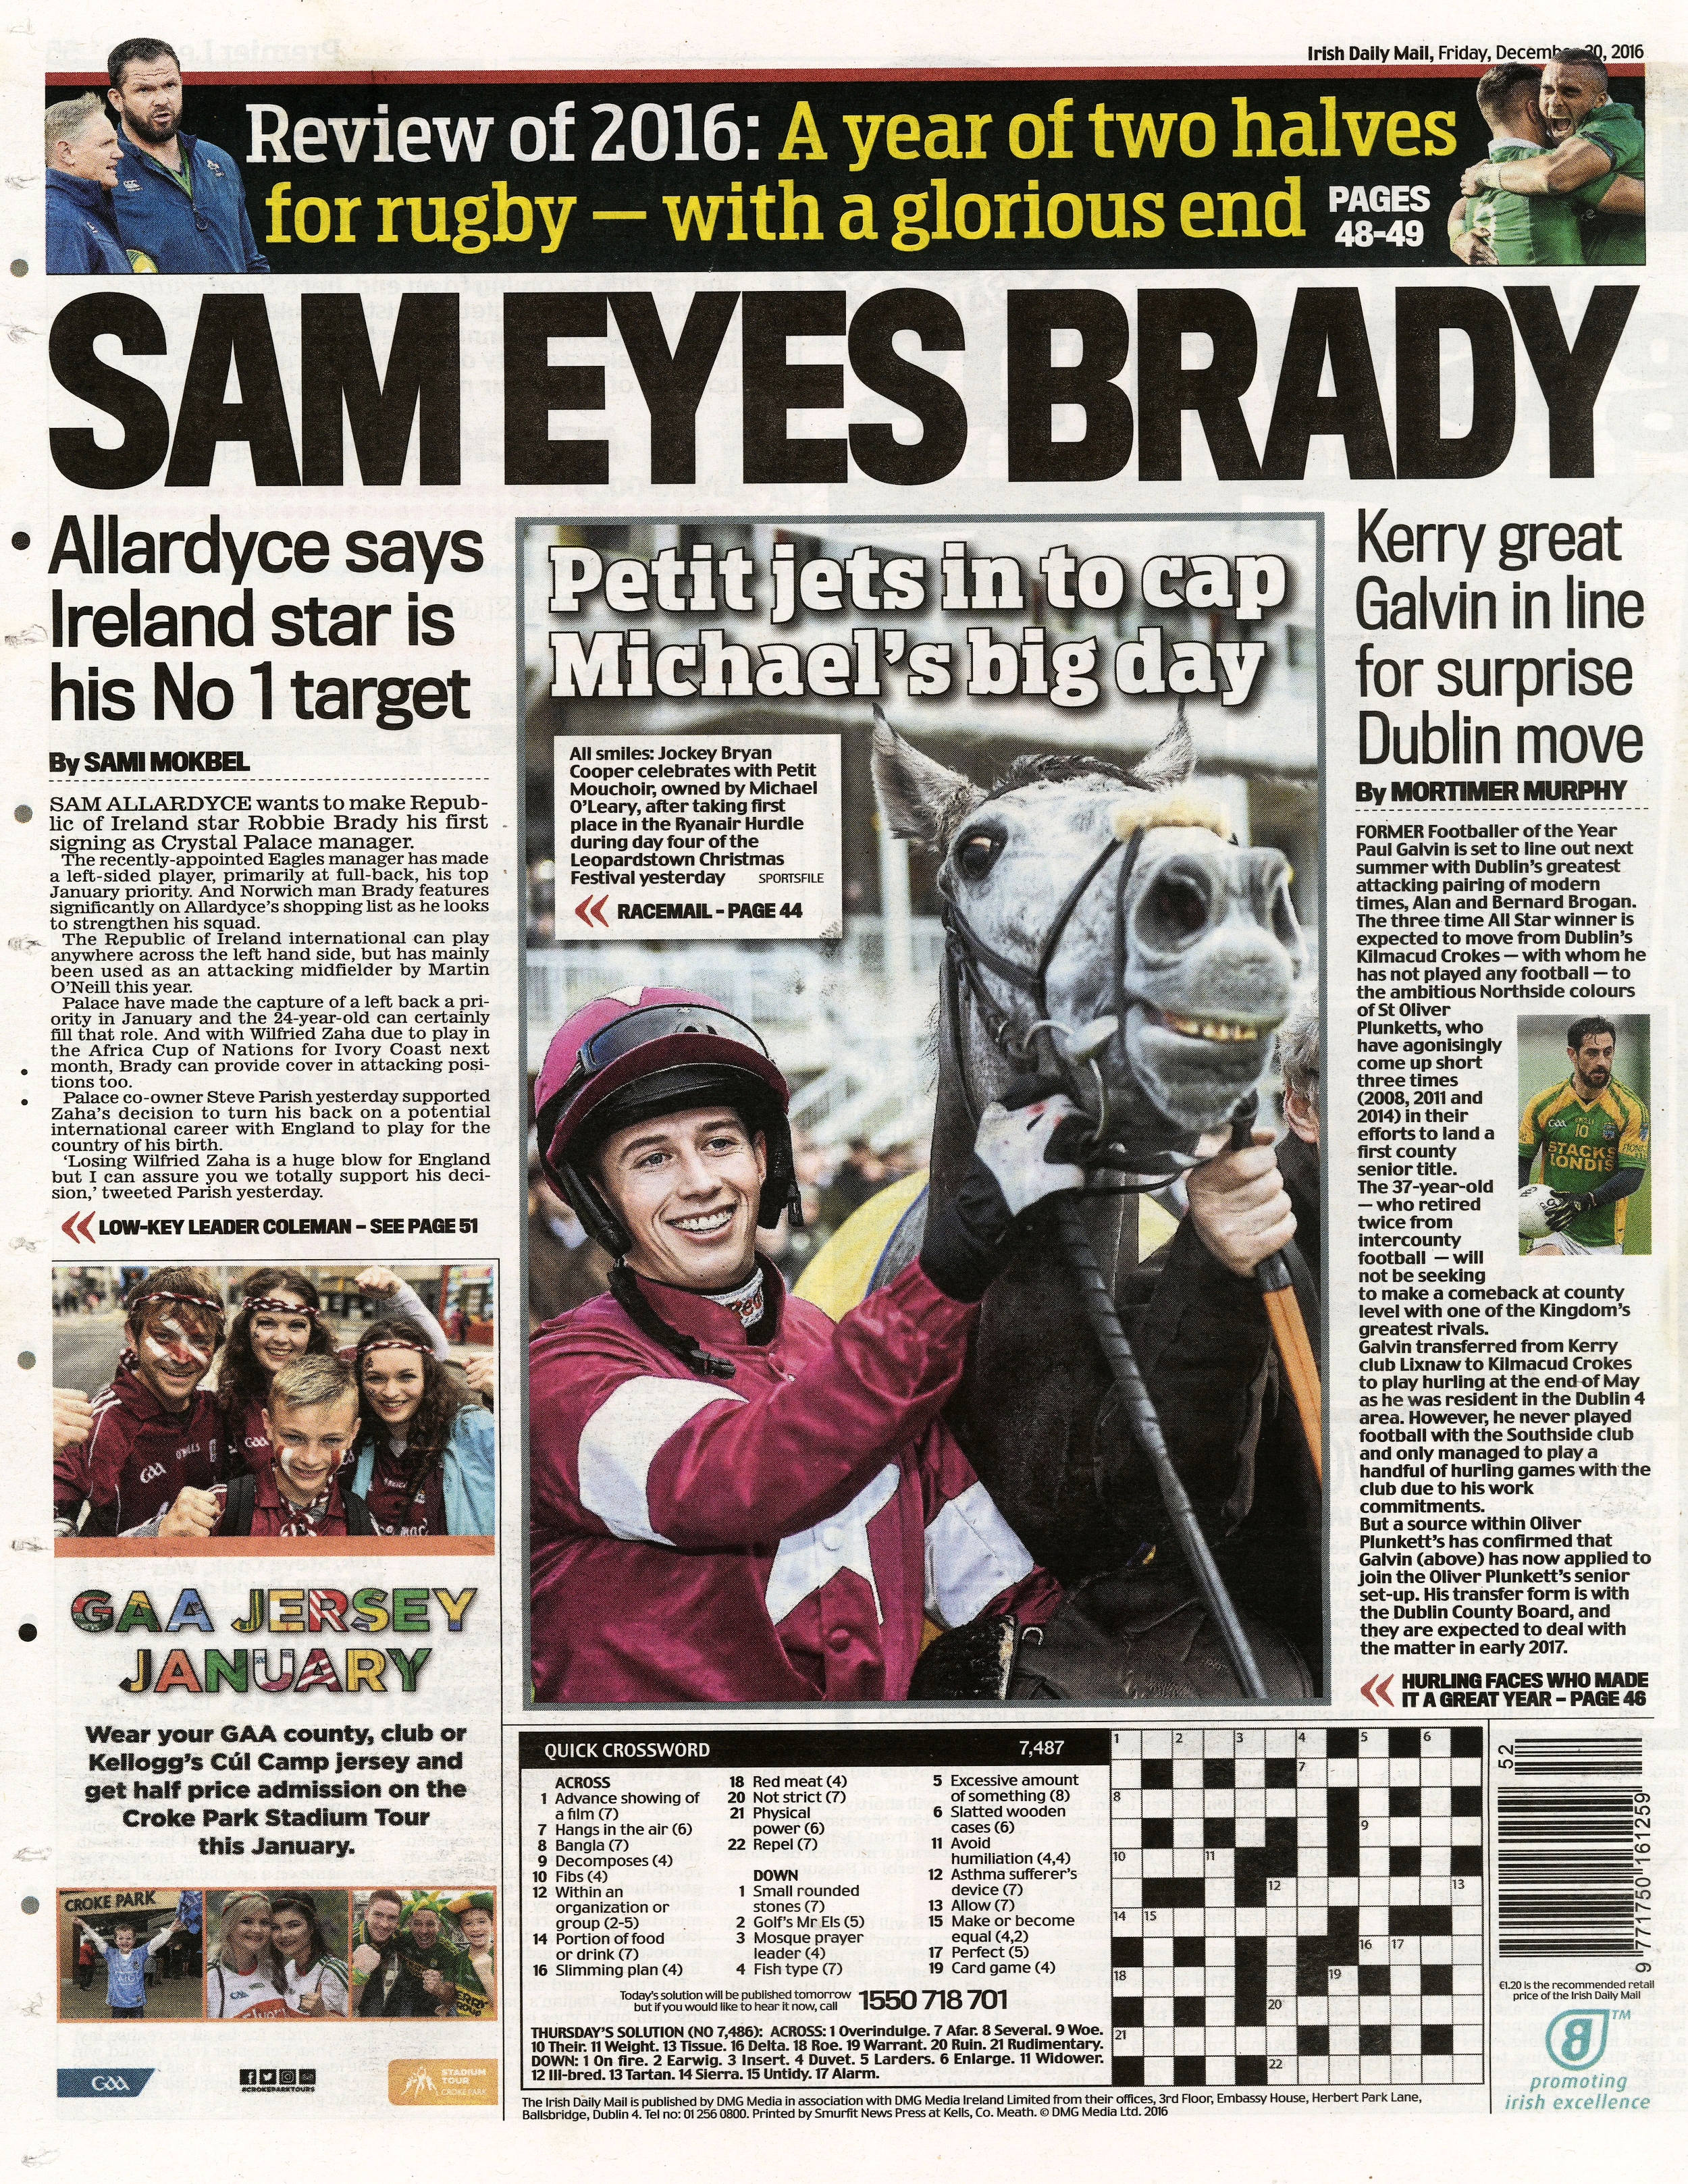  Ryan Moore celebrates with Petit Mouchoir after winning during the Leopardstown Christmas Festival December 30 2016  Irish Daily Mail  